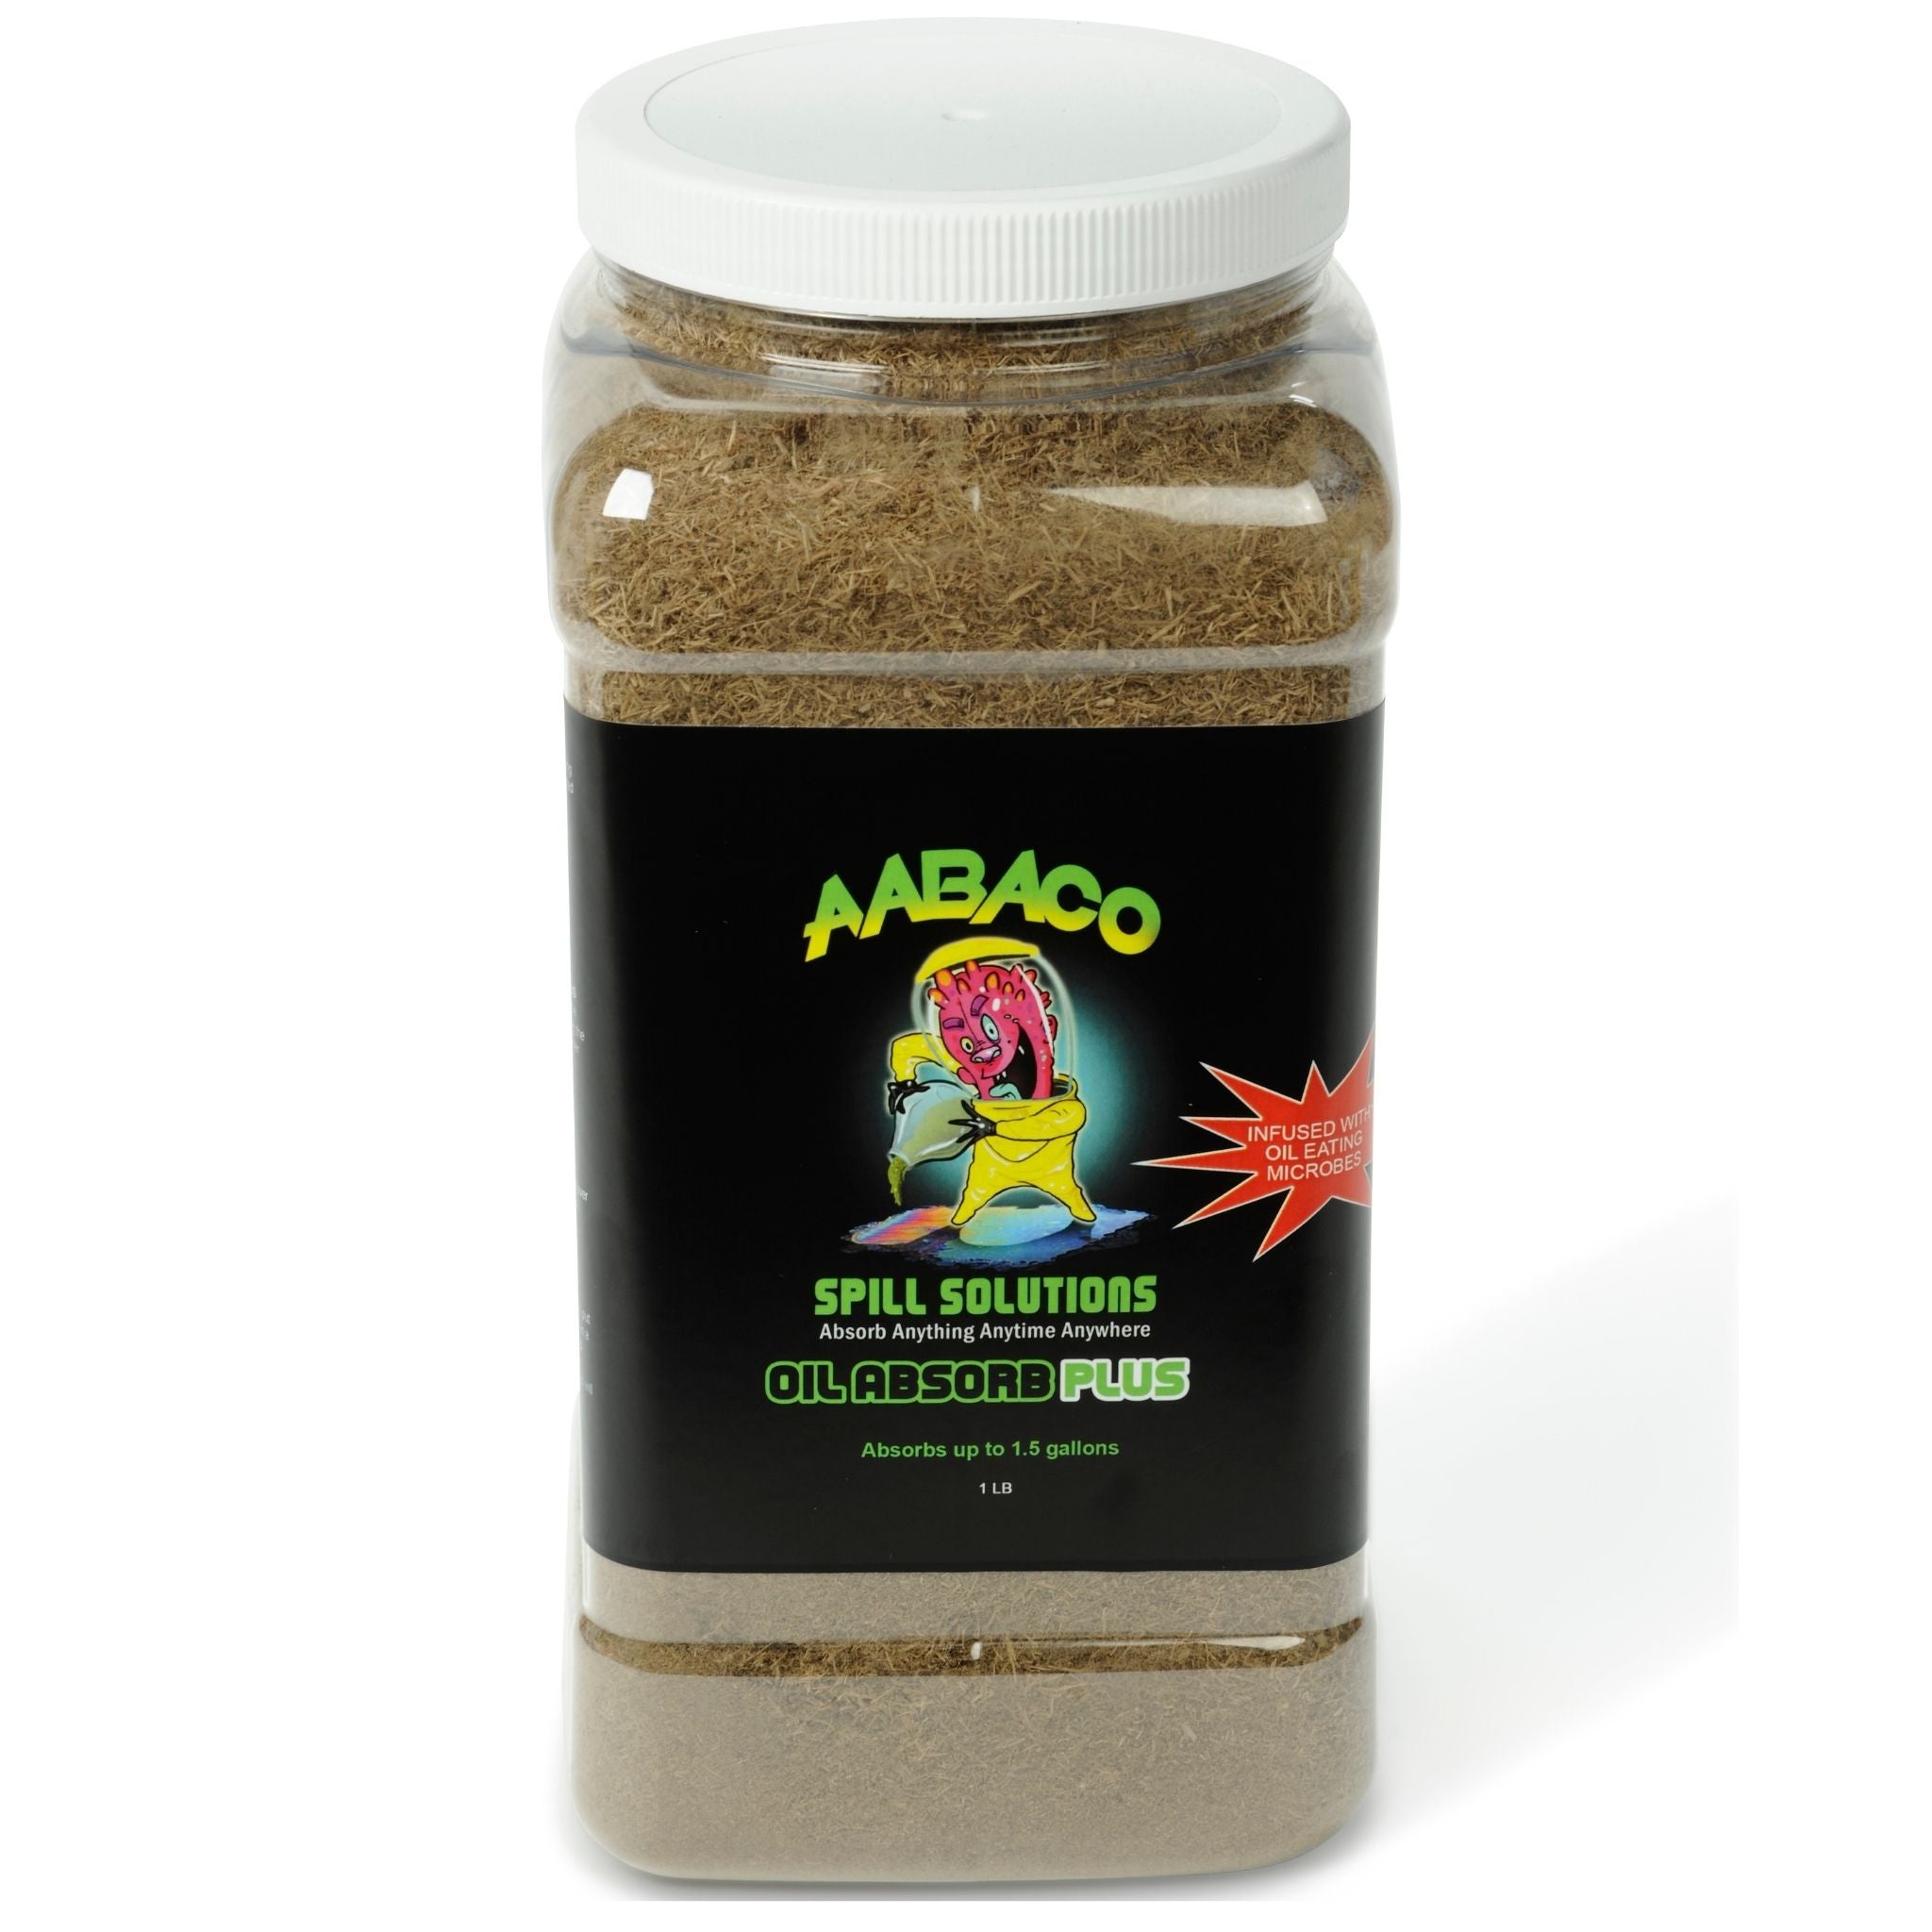 AABACO Oil Absorb Plus - Absorbs and retains all oil/hydrocarbons on contact